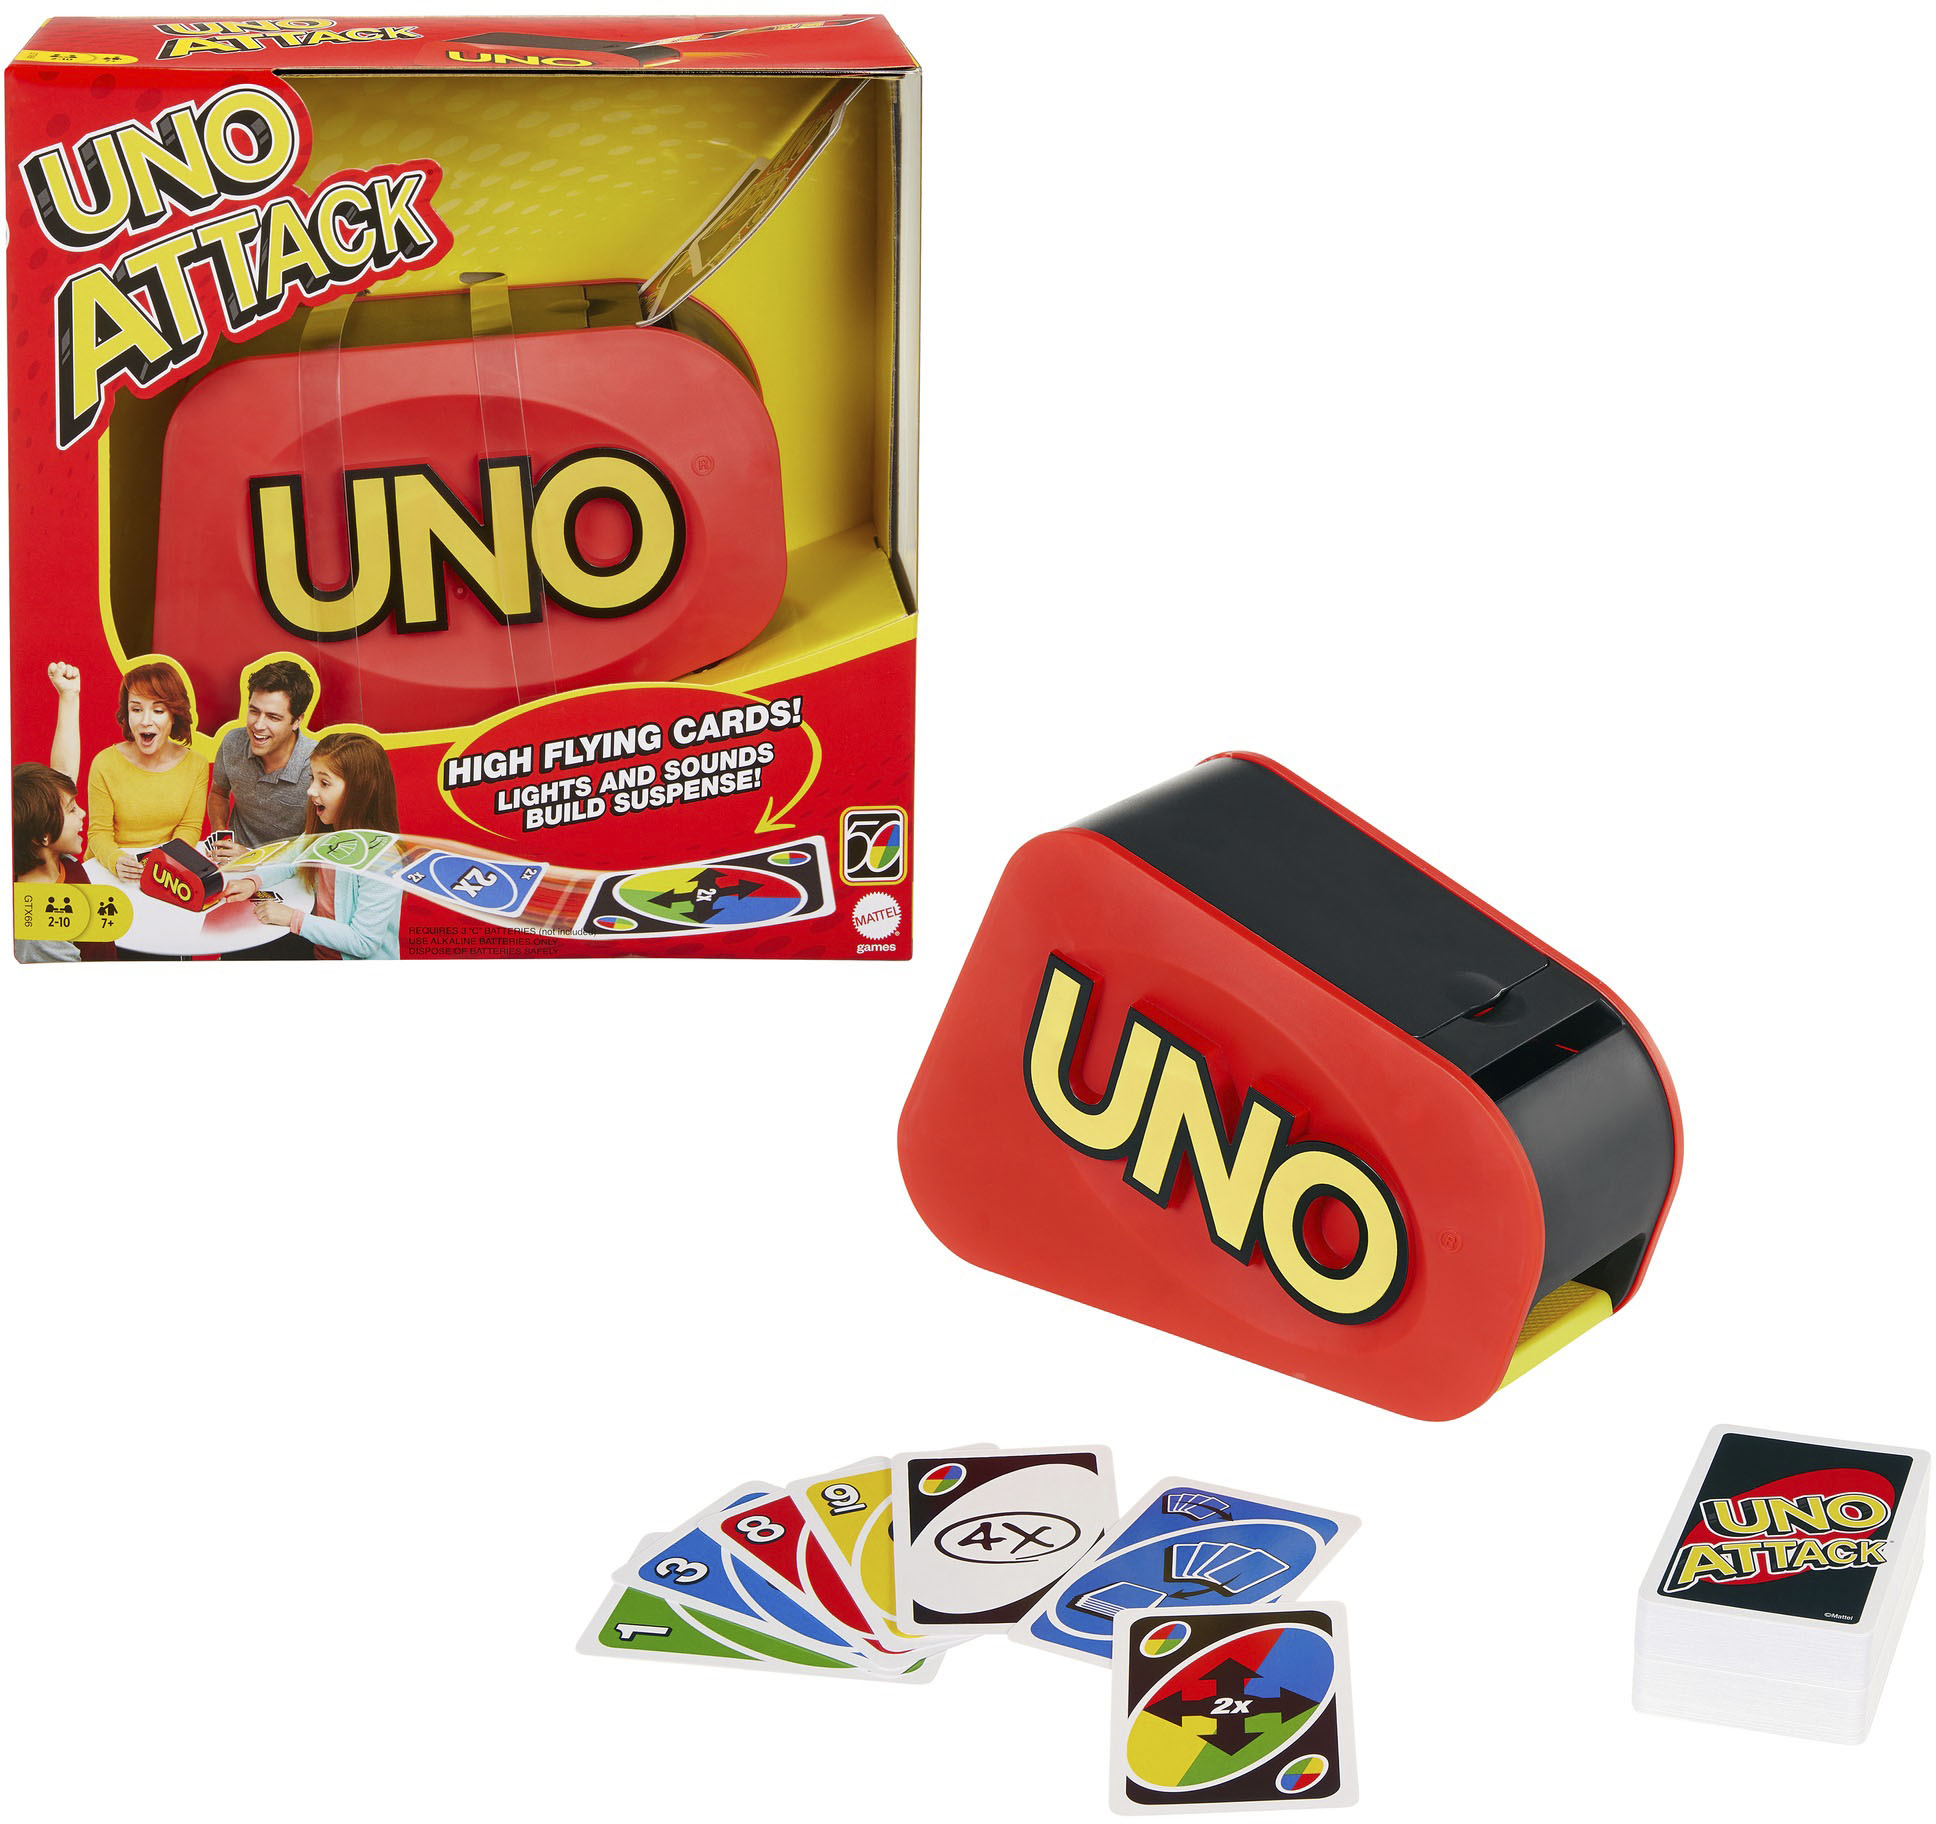 Uno Reverse Gifts & Merchandise for Sale